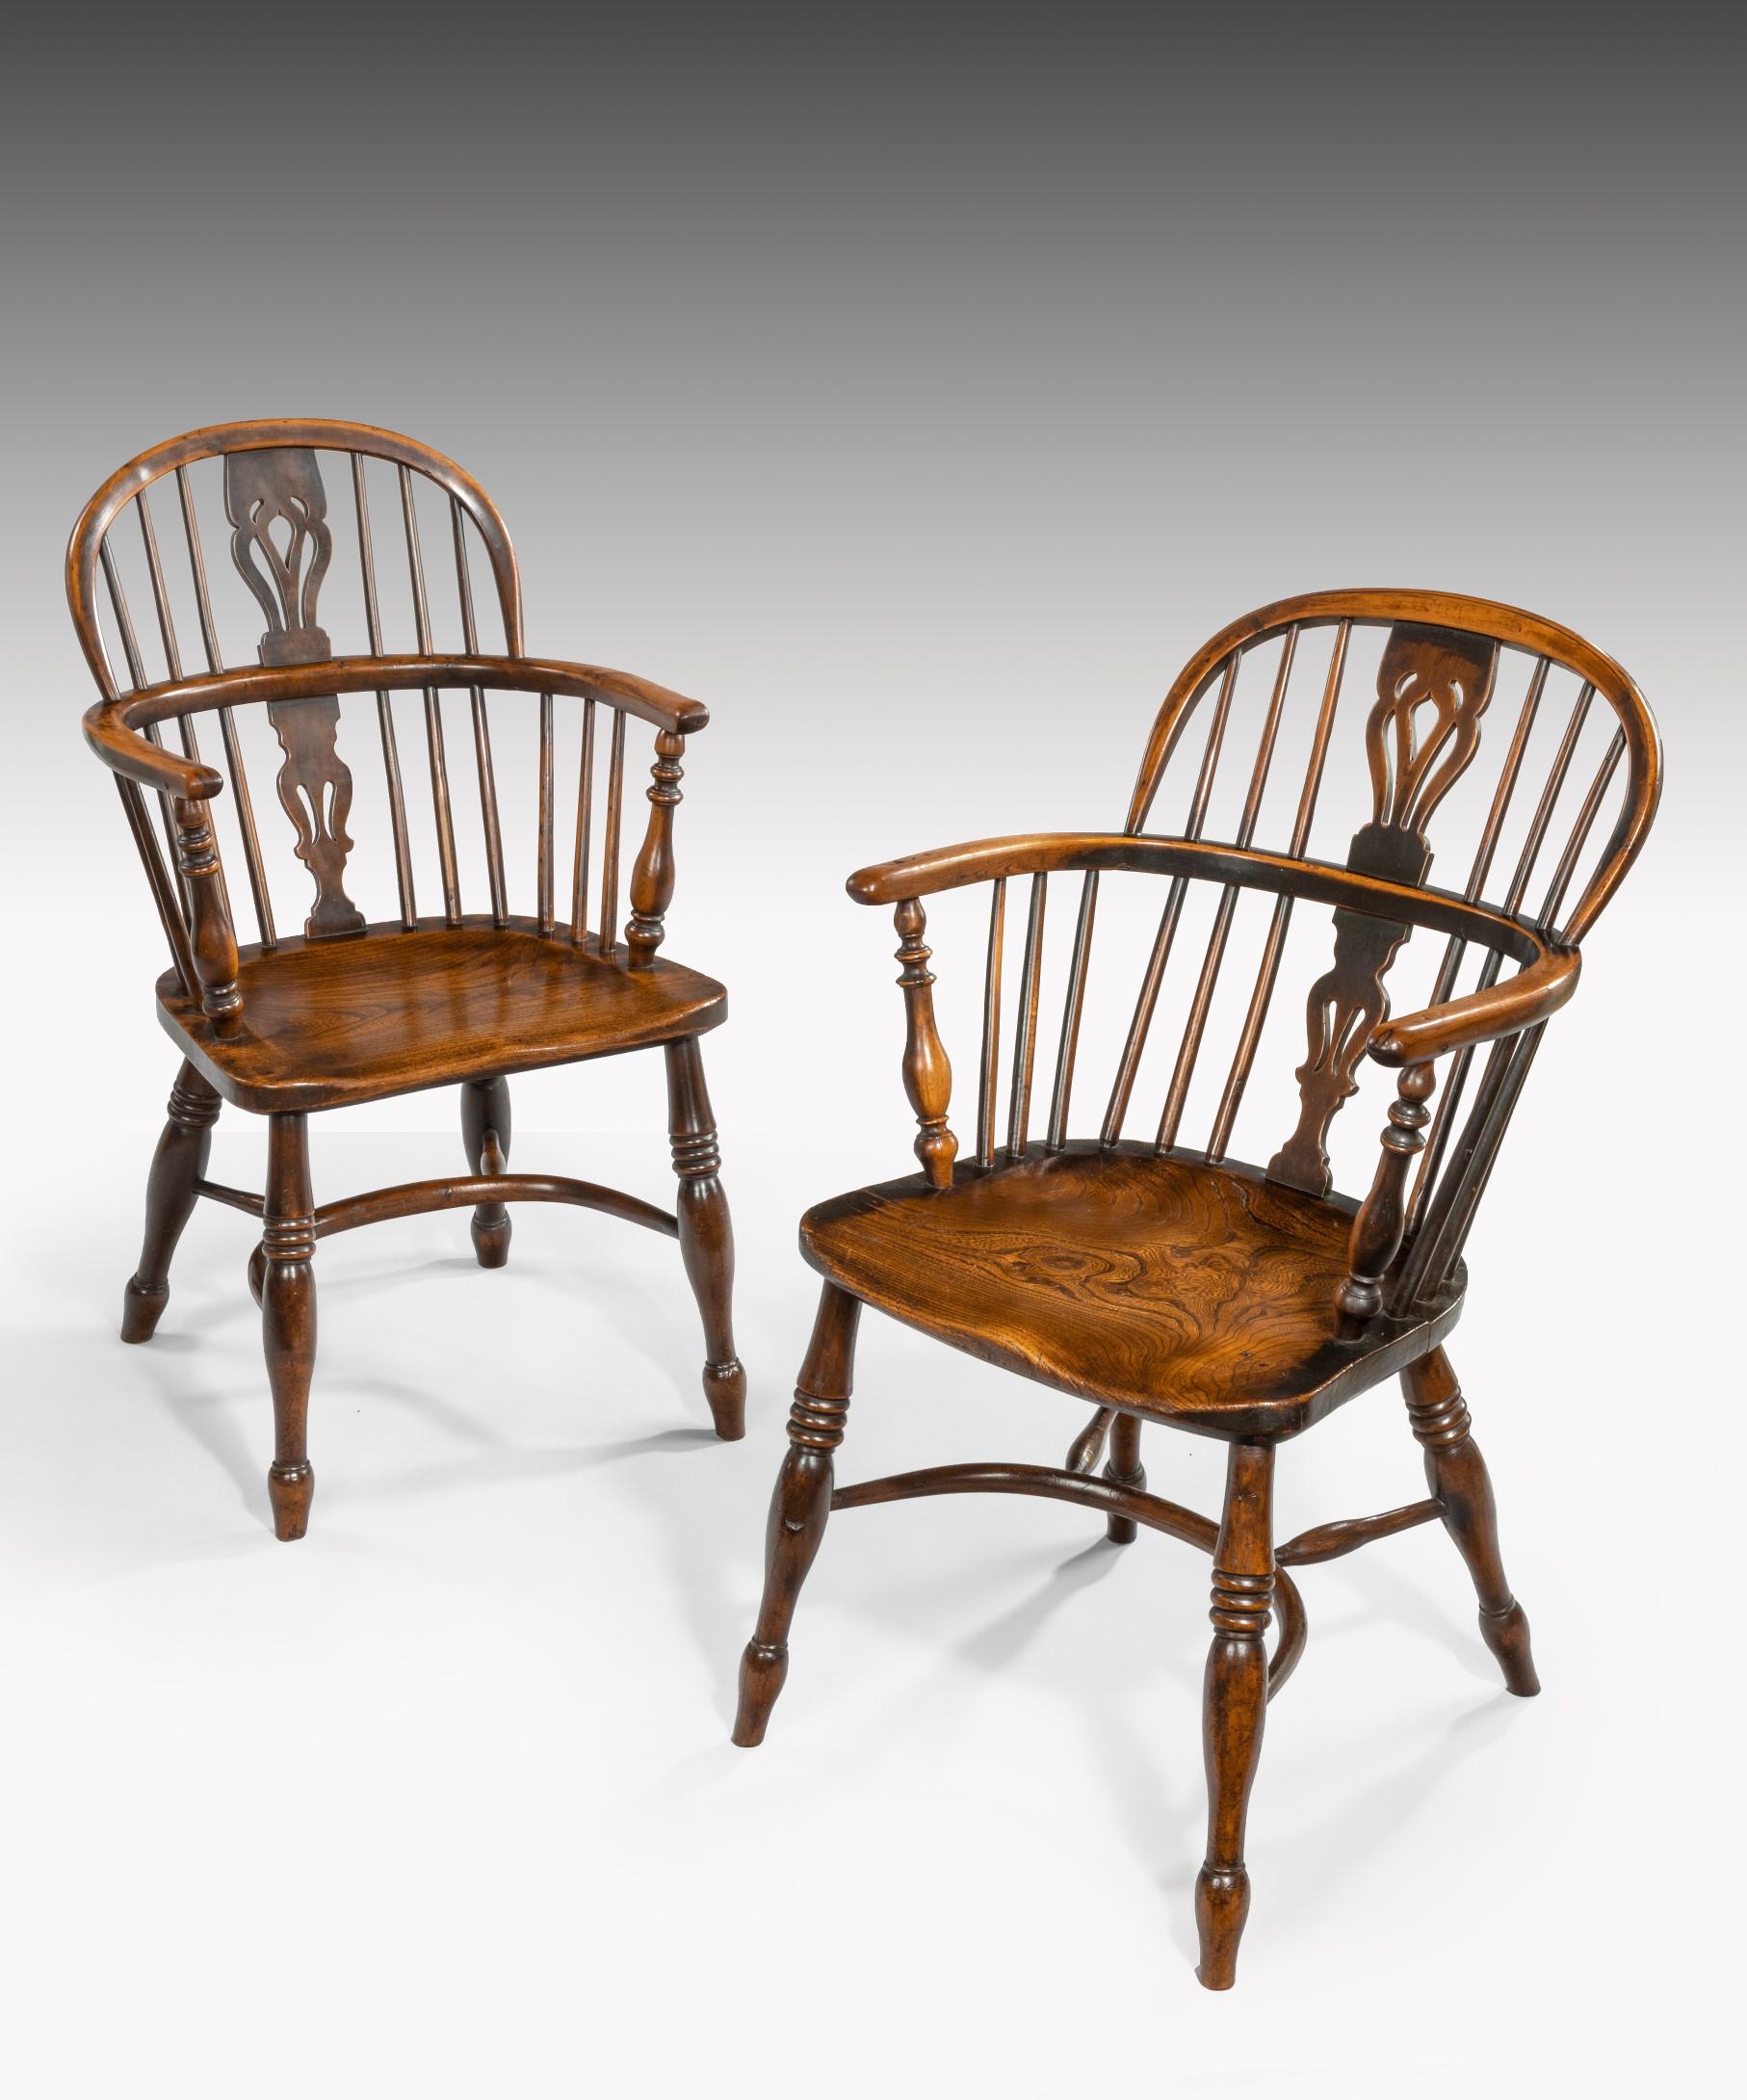 A Harlequin set of four 19th century yewwood and elm windsor armchairs; the windsor armchair's hooped back with a central pierced yewwood splat above a shaped elm seat; raised on ring turned legs united by an H-stetcher.

The windsor armchairs